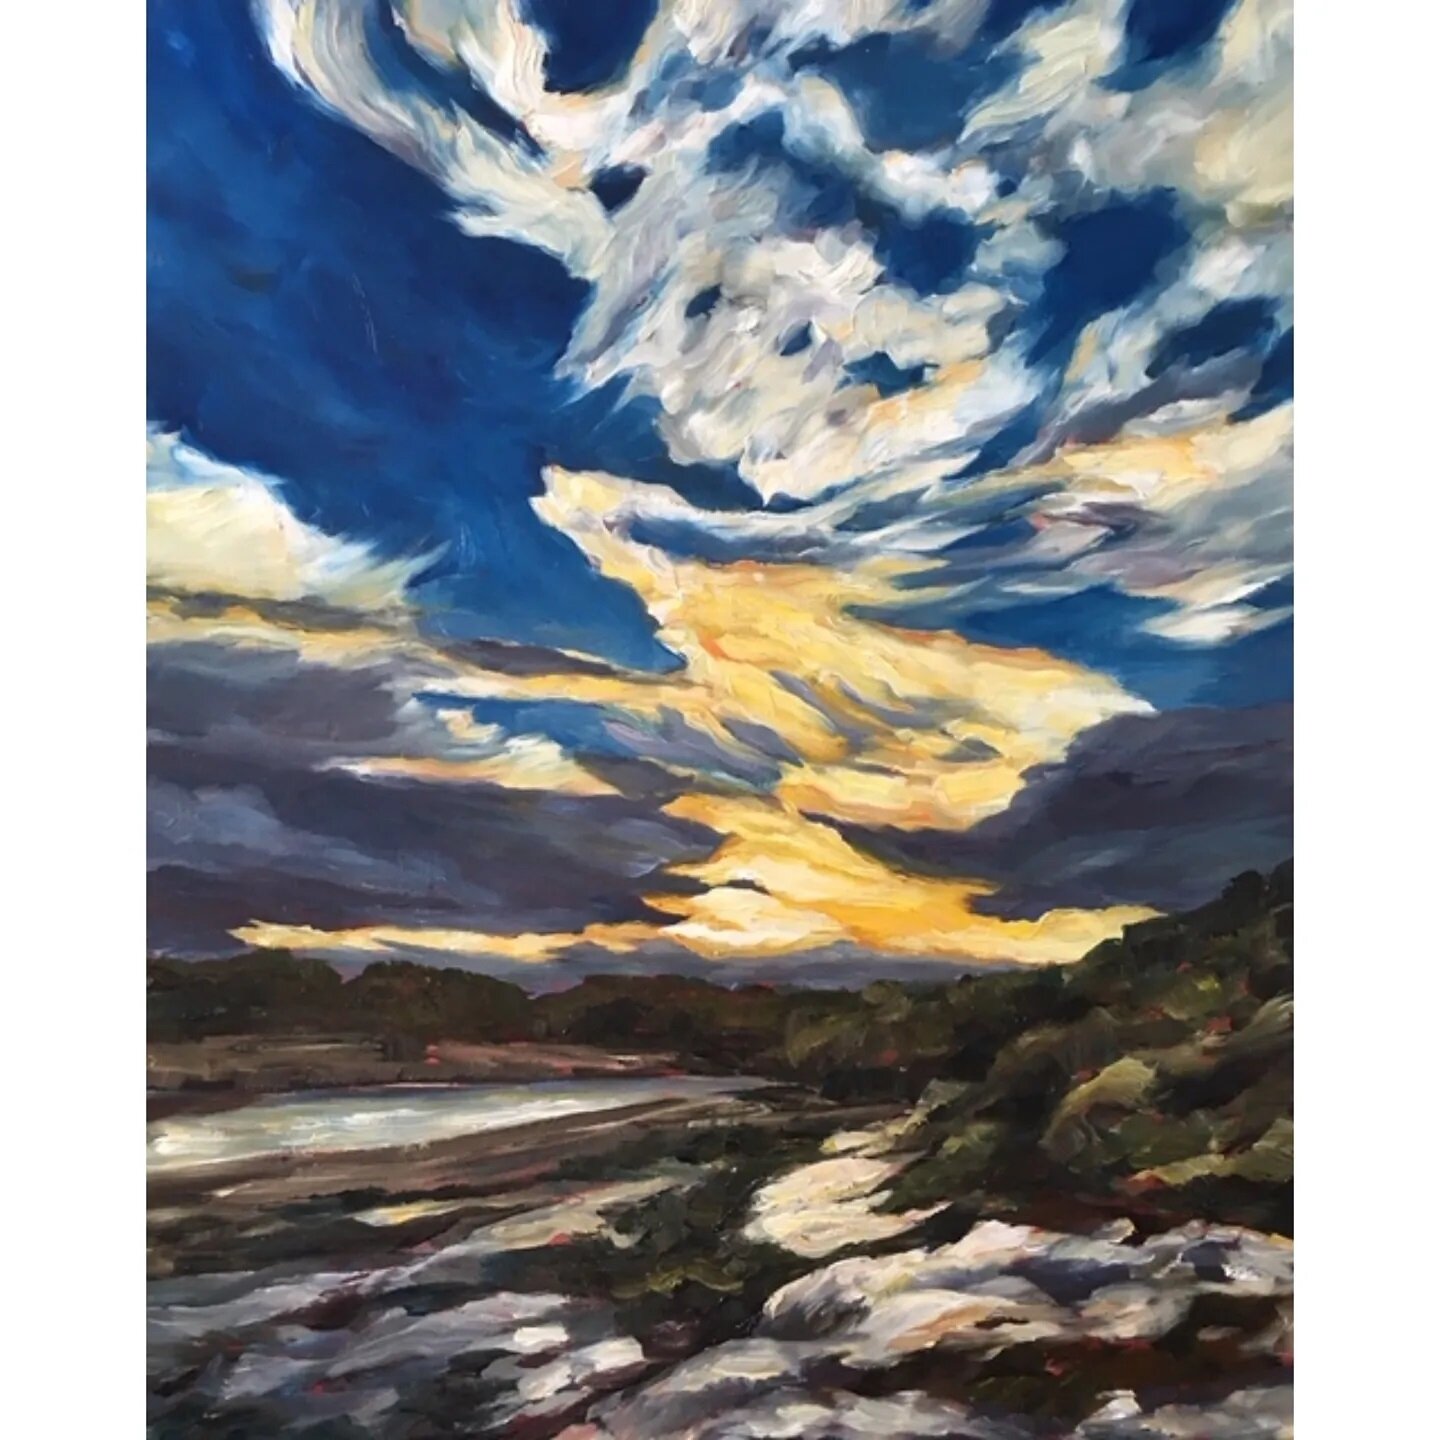 April White has been a resident of Lennox Street Studios for sixteen years. Recent road trips throughout Australia were an inspiration for her latest body of work.&nbsp;

New paintings from this collection in oil and acrylic on canvas and board are n